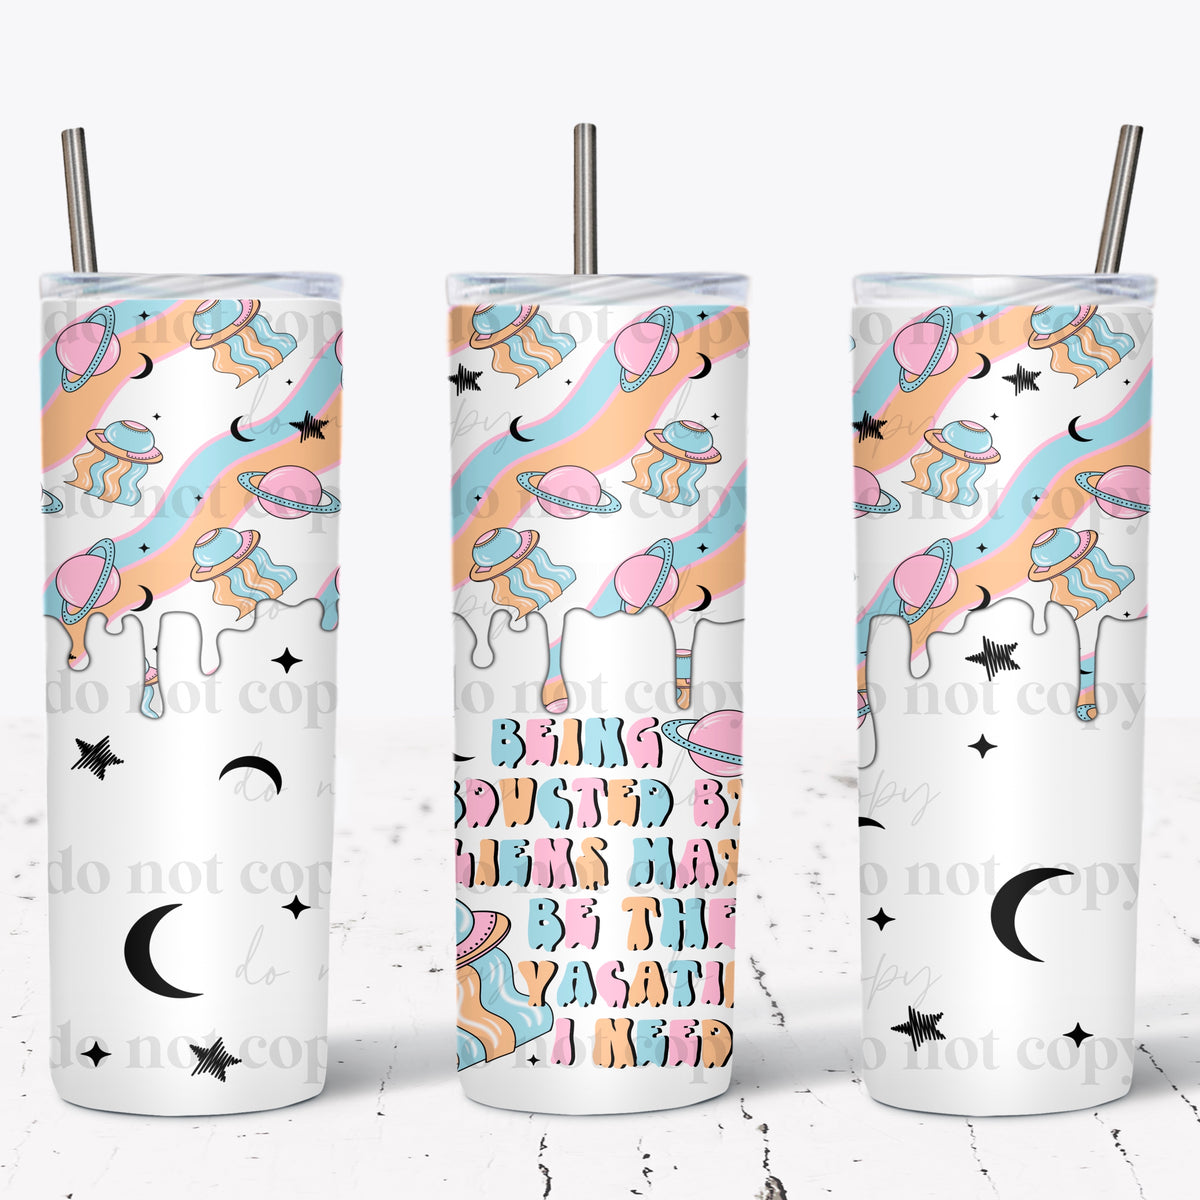 Abducted Tumbler Wrap